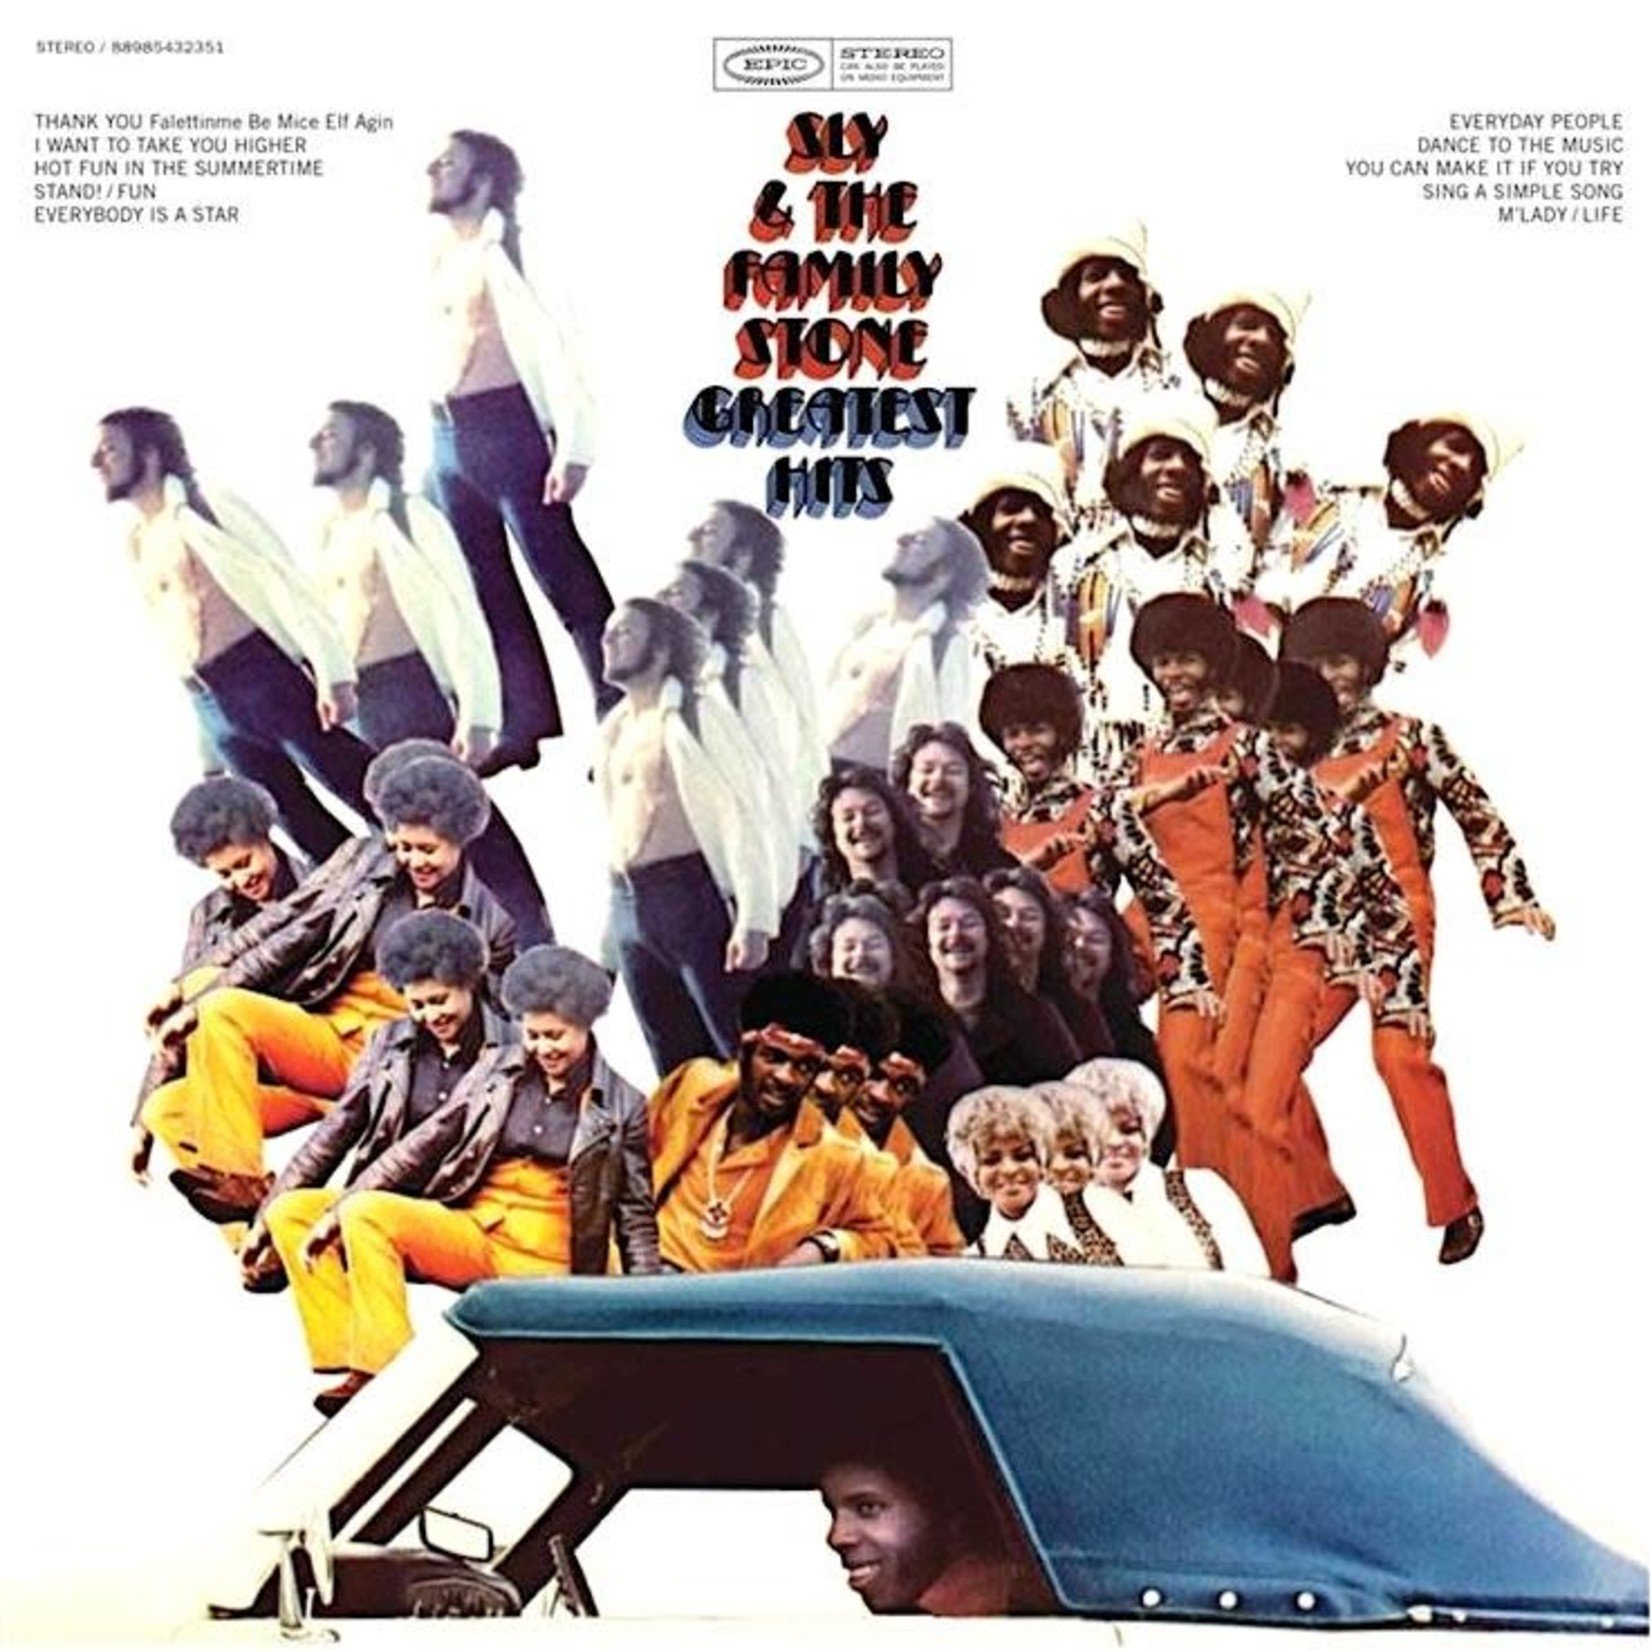 [Vintage] Sly & the Family Stone - Greatest Hits